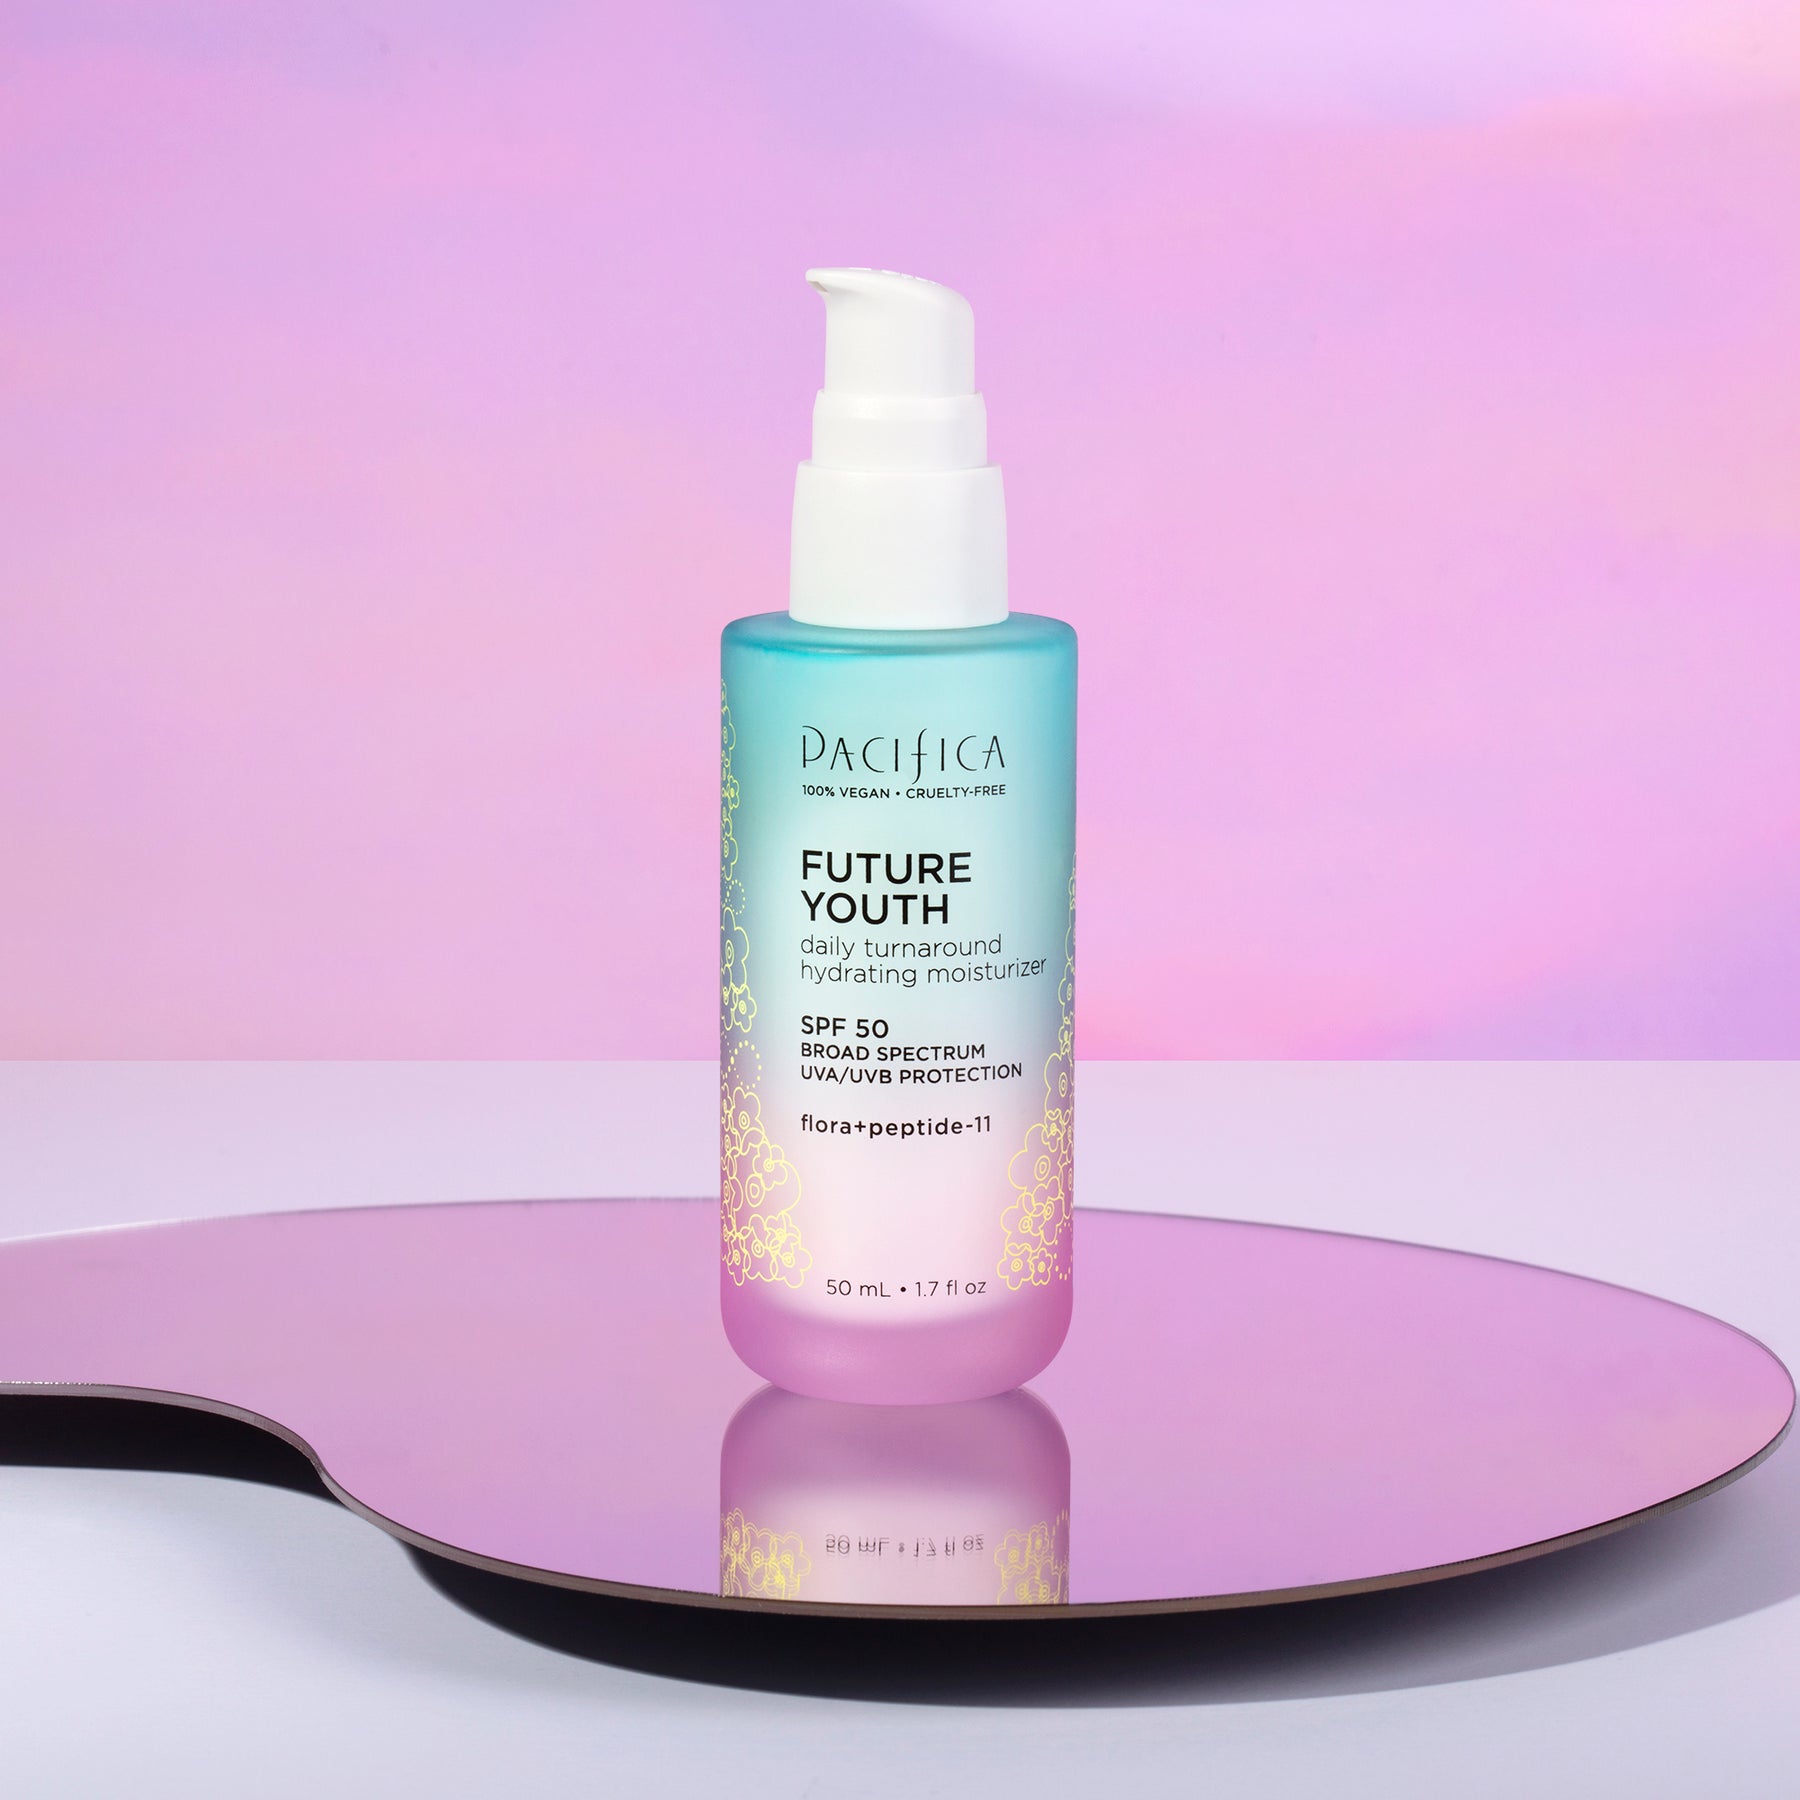 Future Youth Daily Turnaround Hydrating Moisturizer SPF 50 - Skin Care - Pacifica Beauty